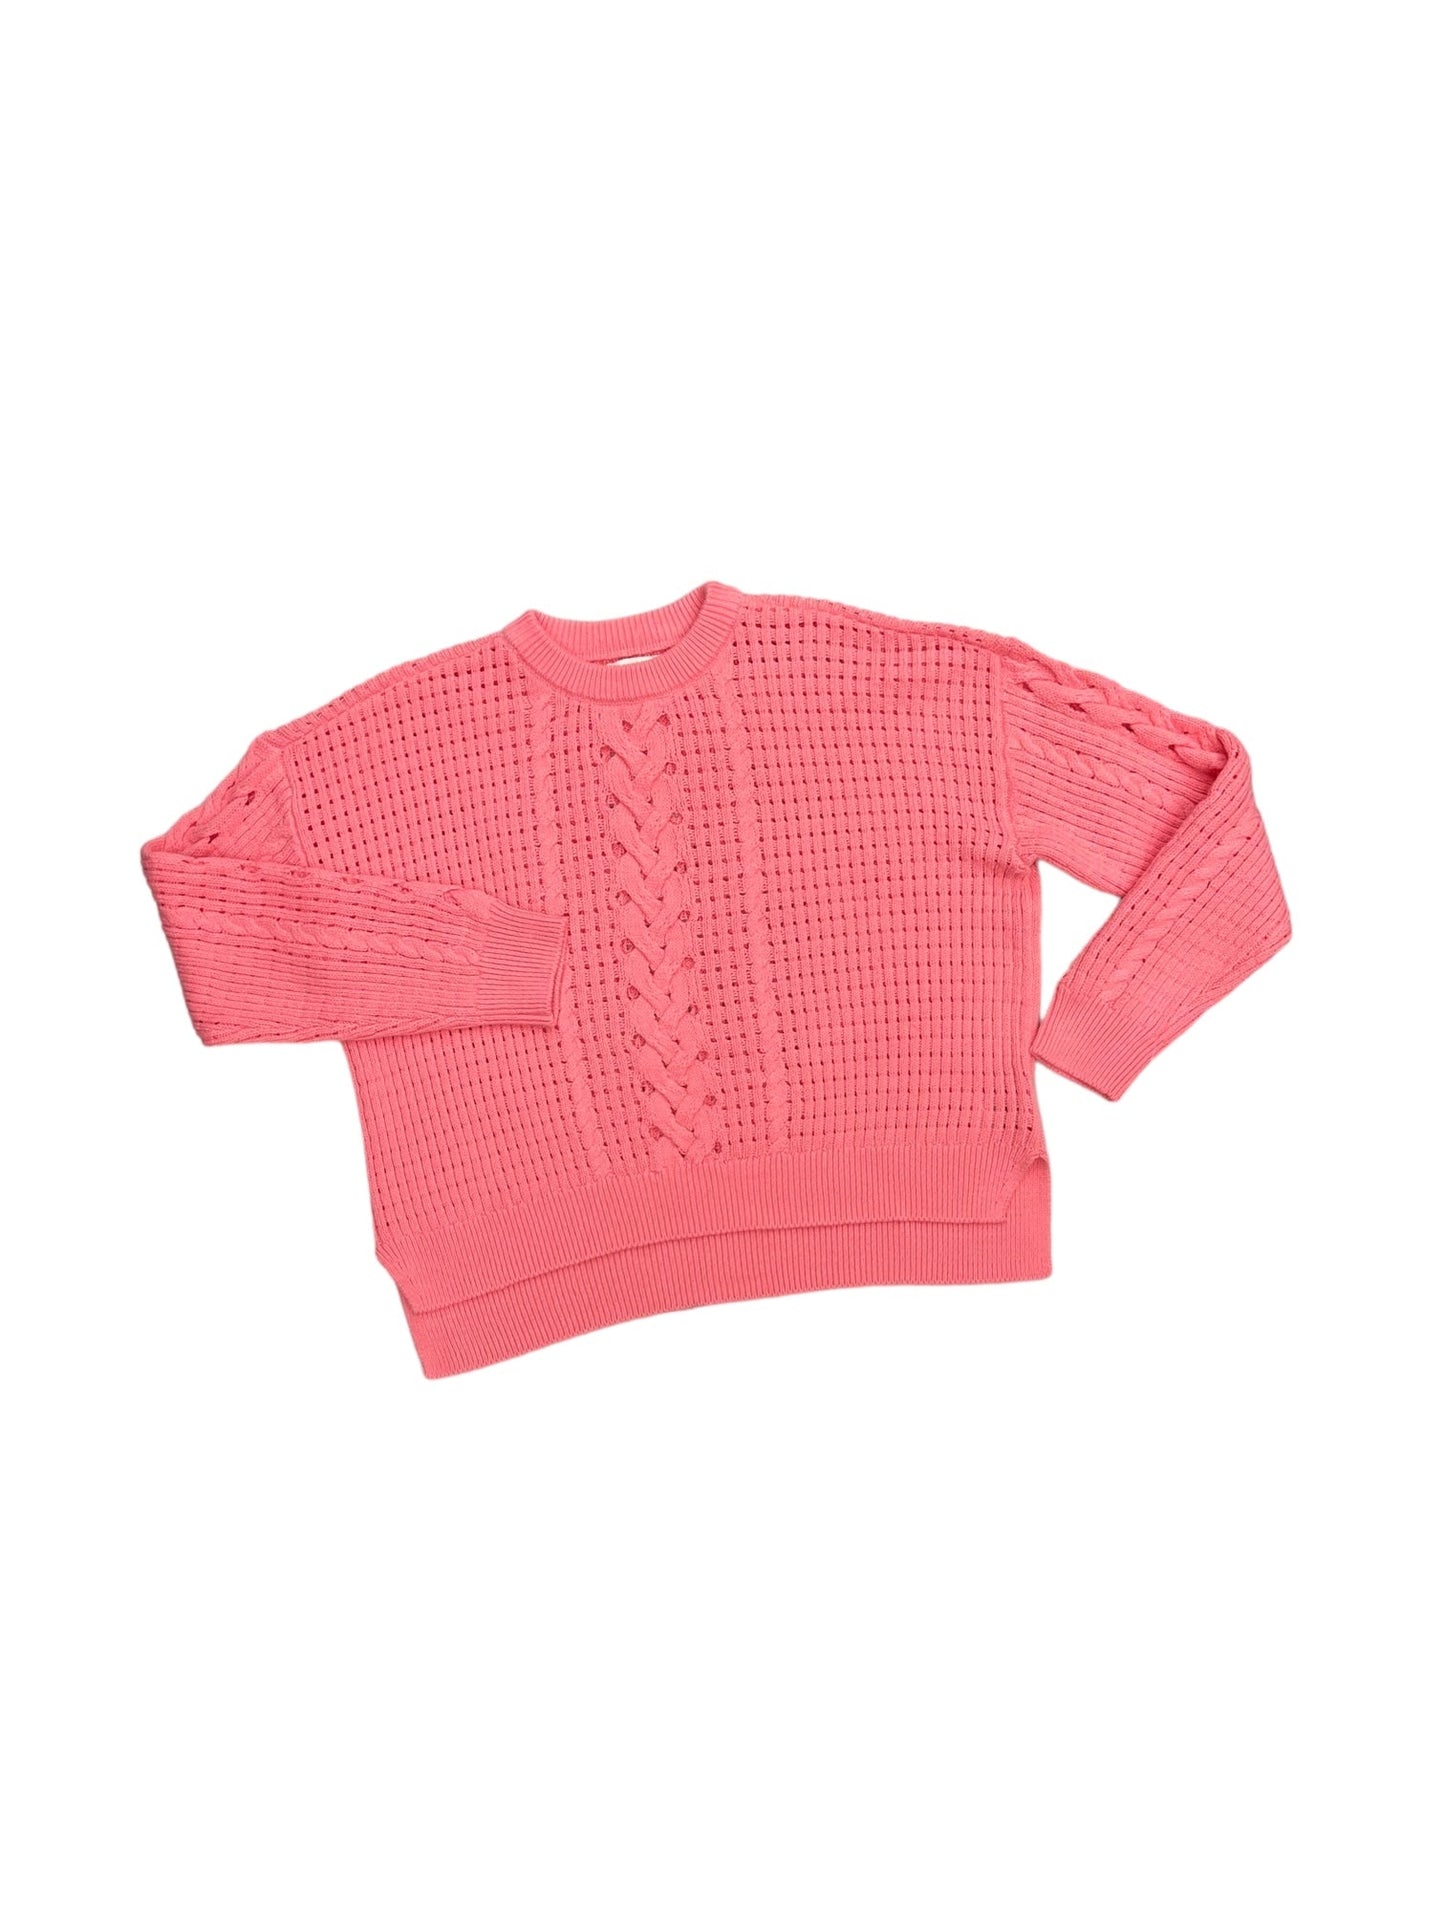 Pink Sweater ON 34TH, Size L